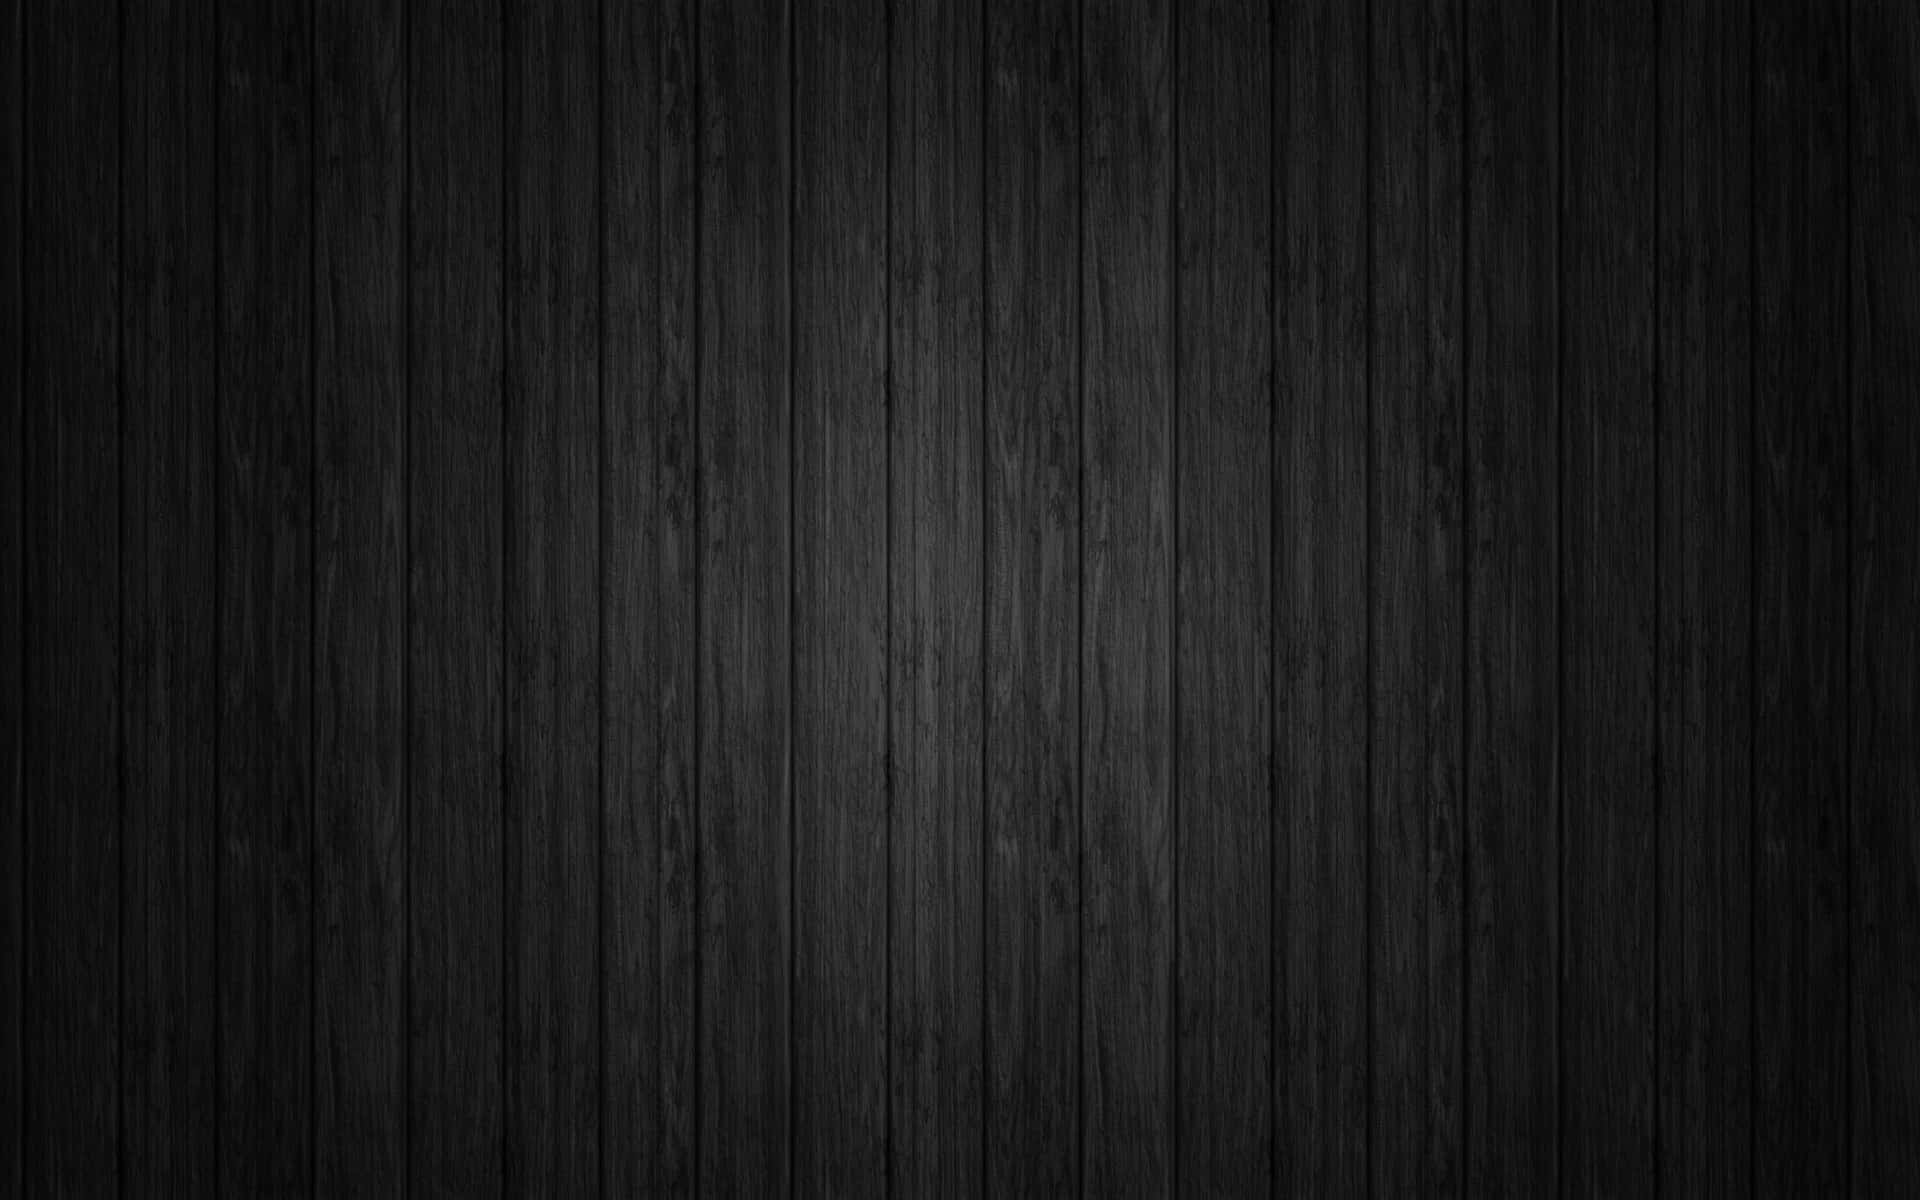 Textures For Photoshop Black Wood Wallpaper